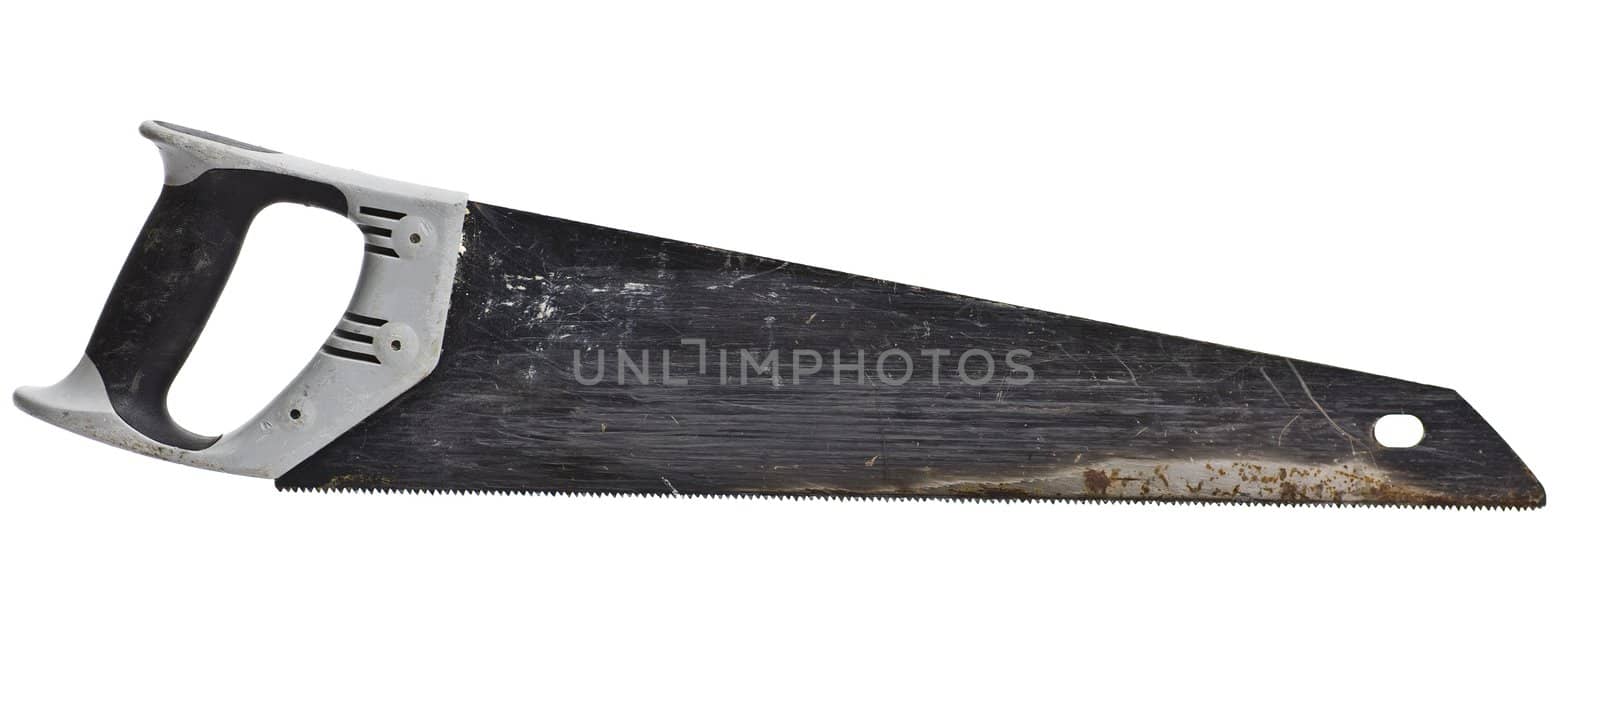 used hand saw with plastic handle on white background